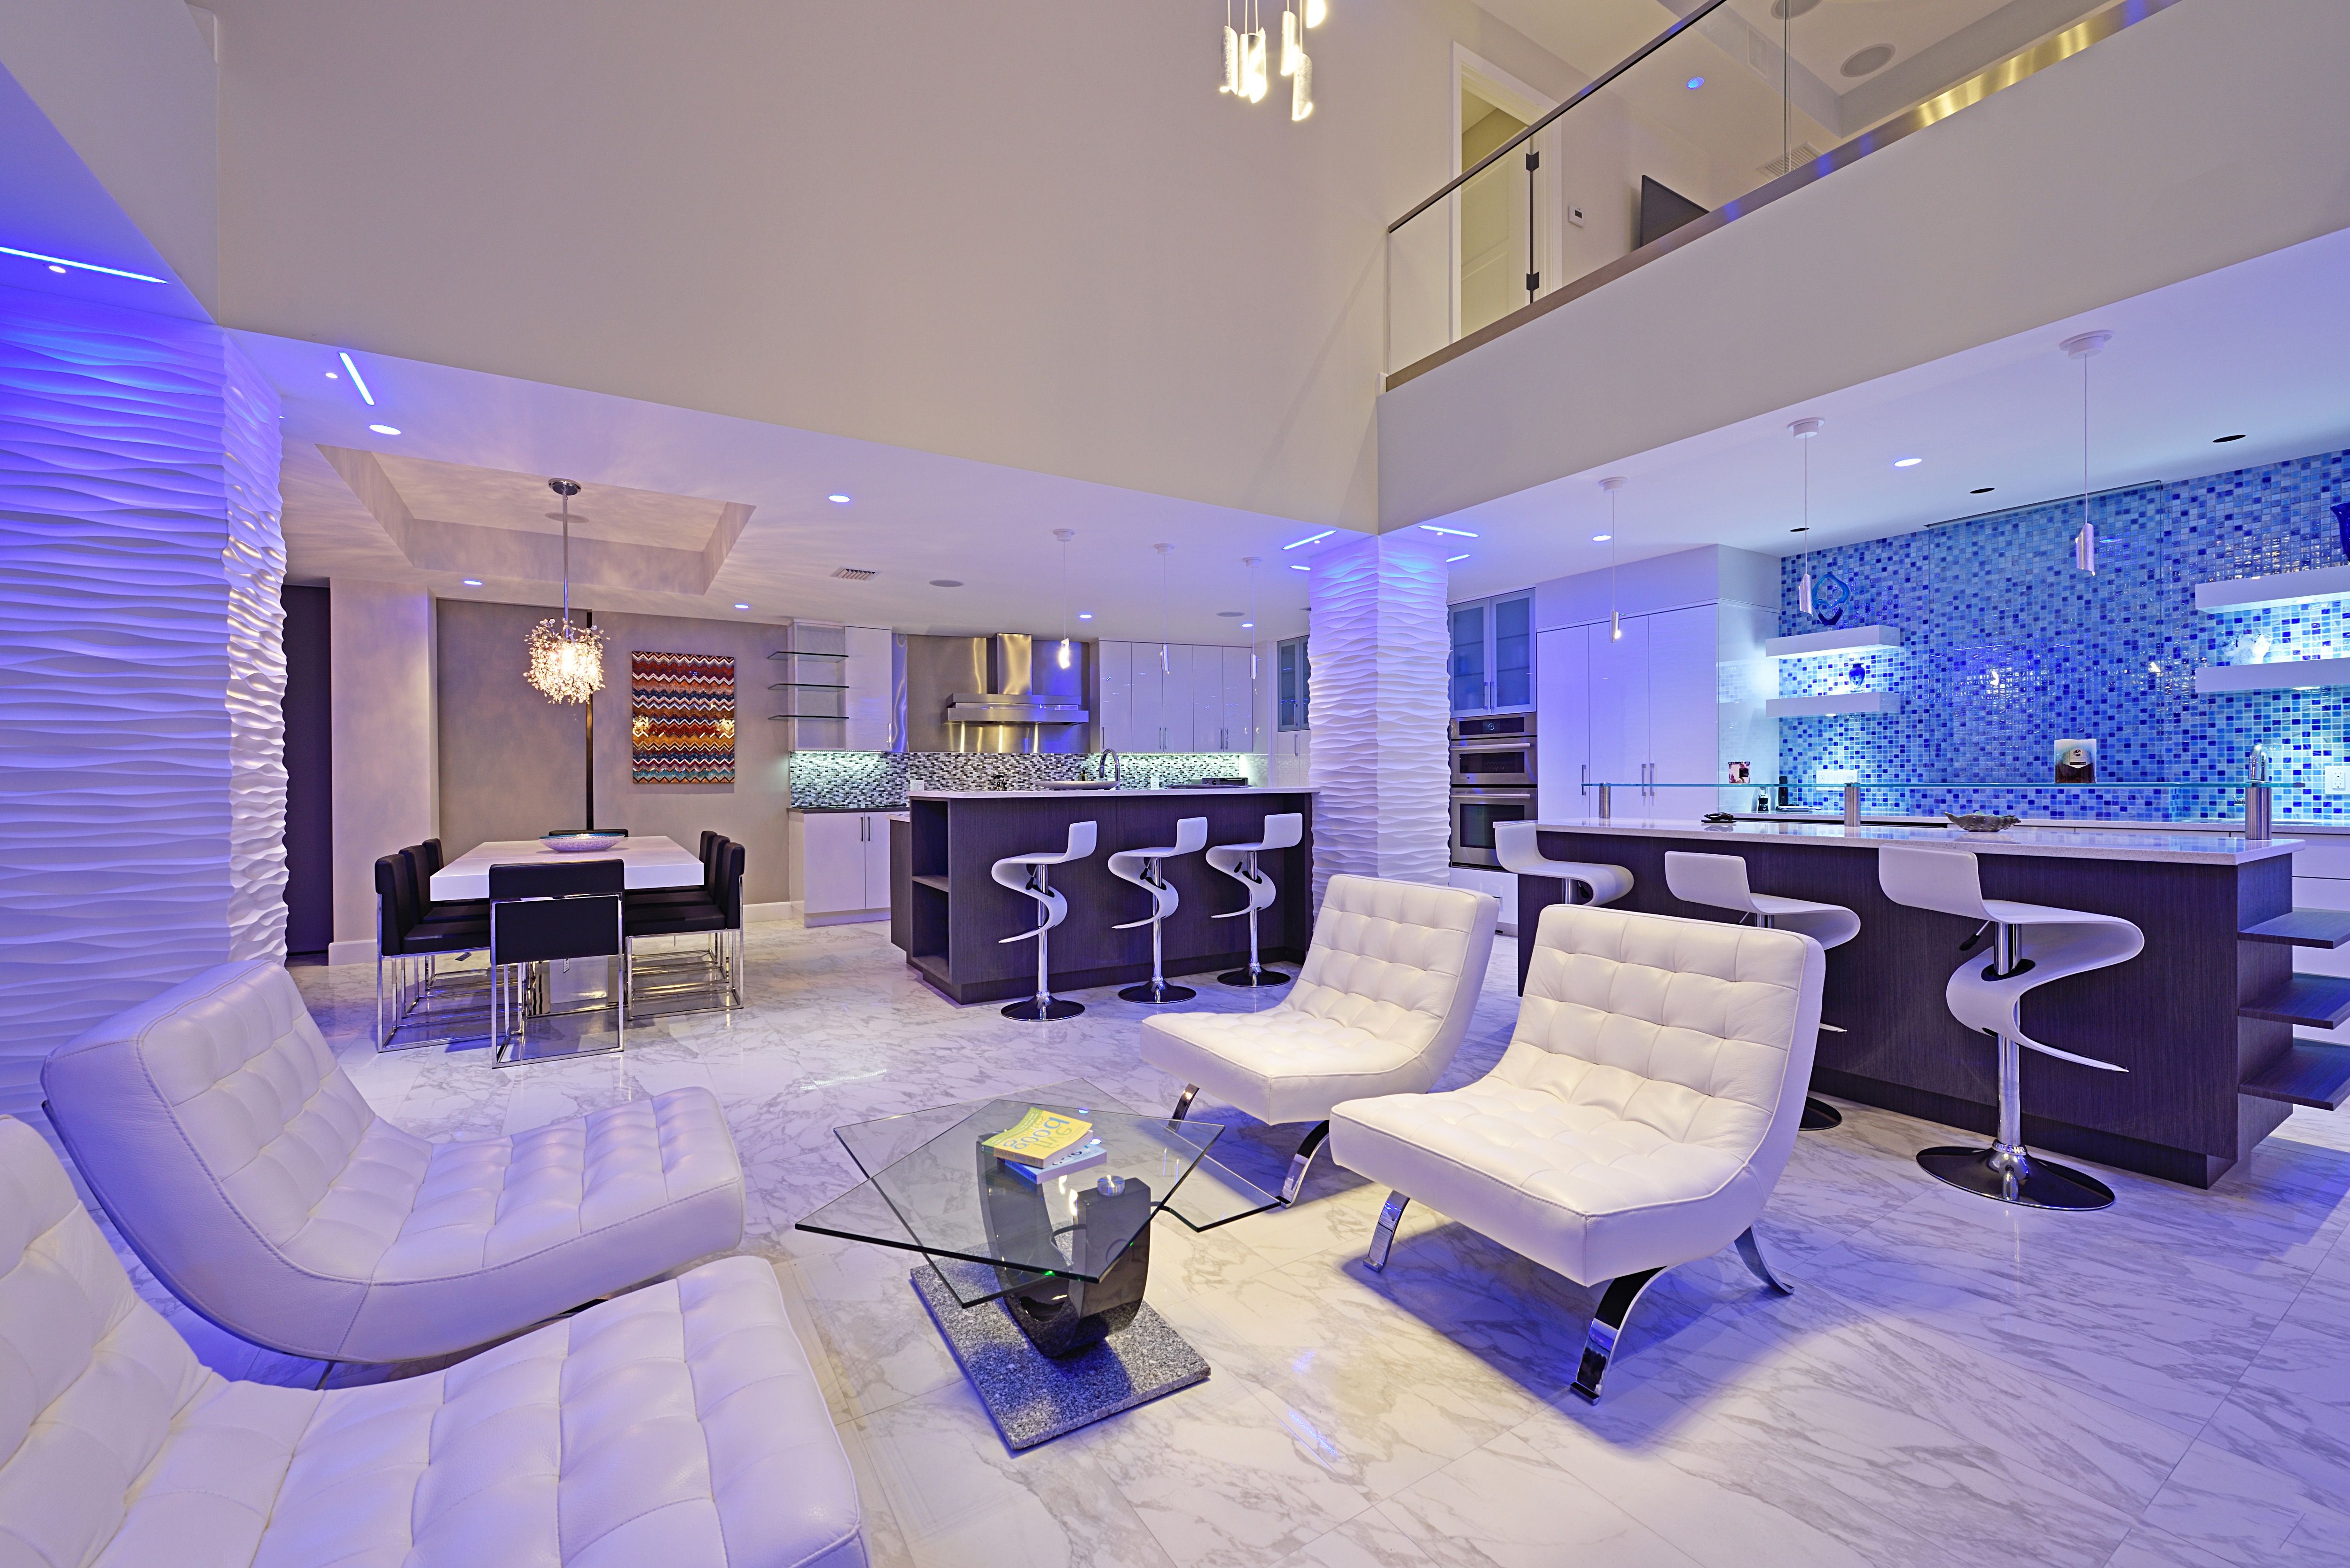 Contemporary White Living Room With Blue Lighting (View 13 of 31)